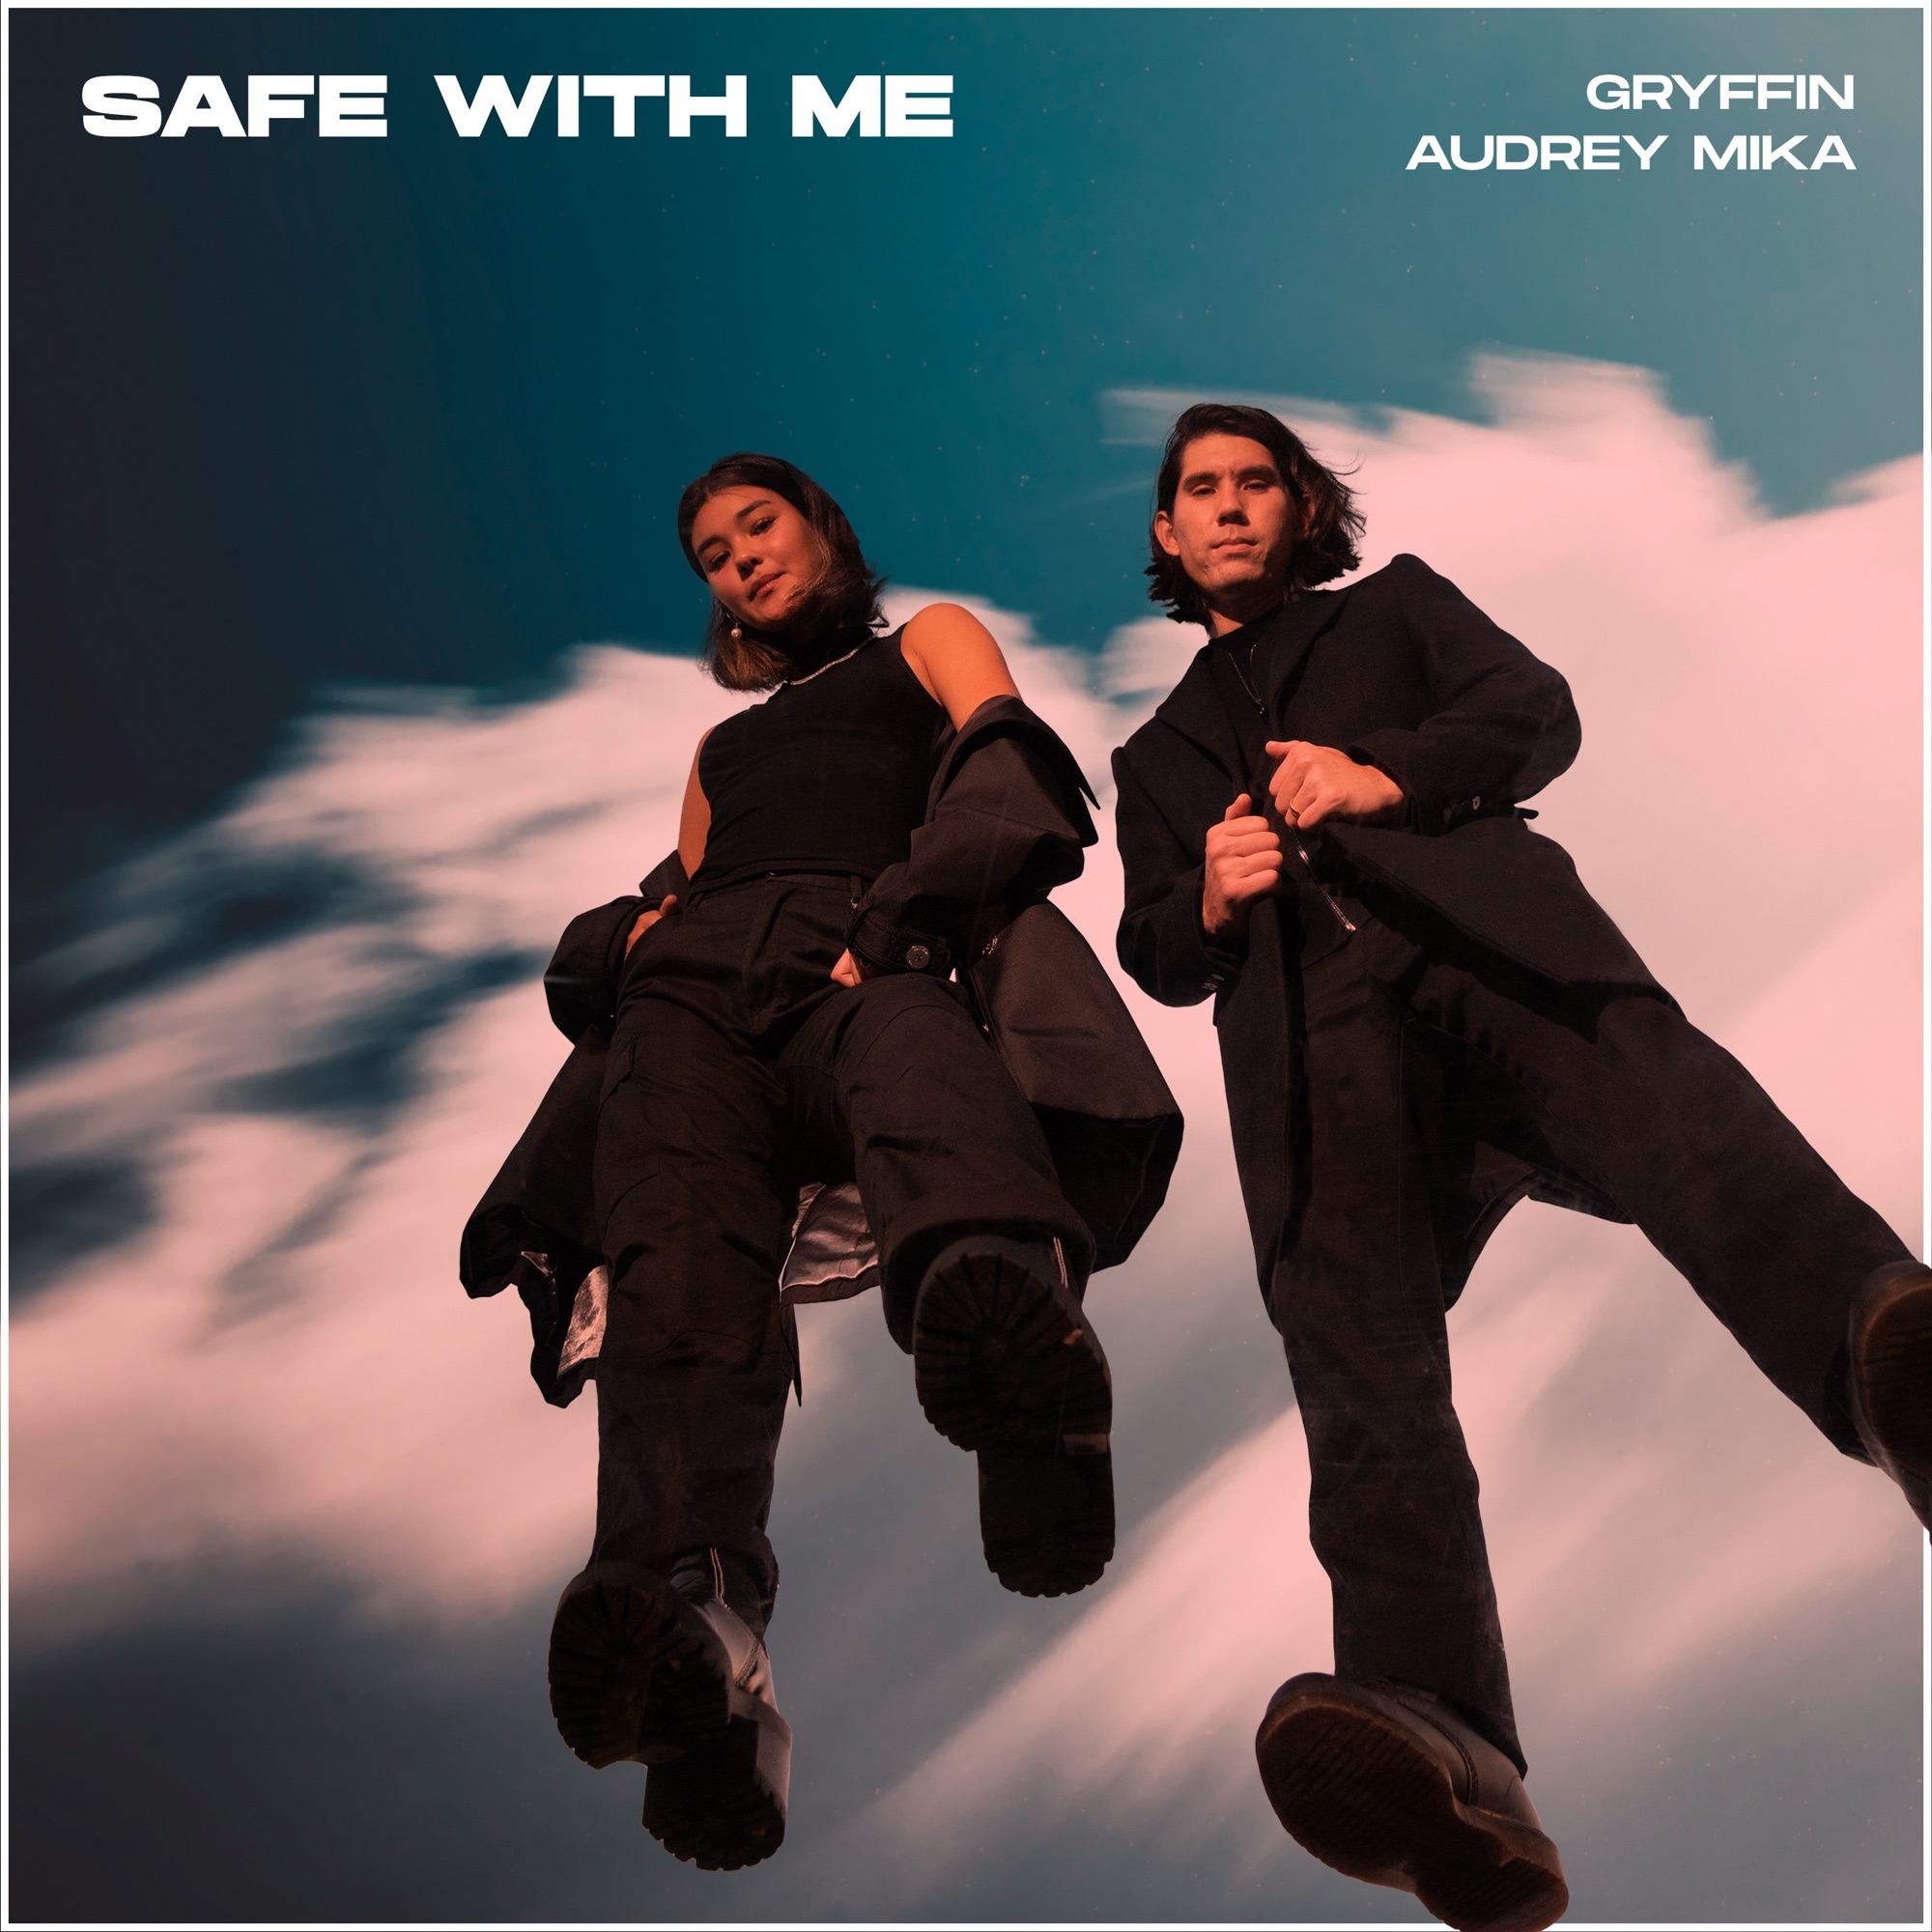 Gryffin & Audrey Mika - Safe with Me - Single